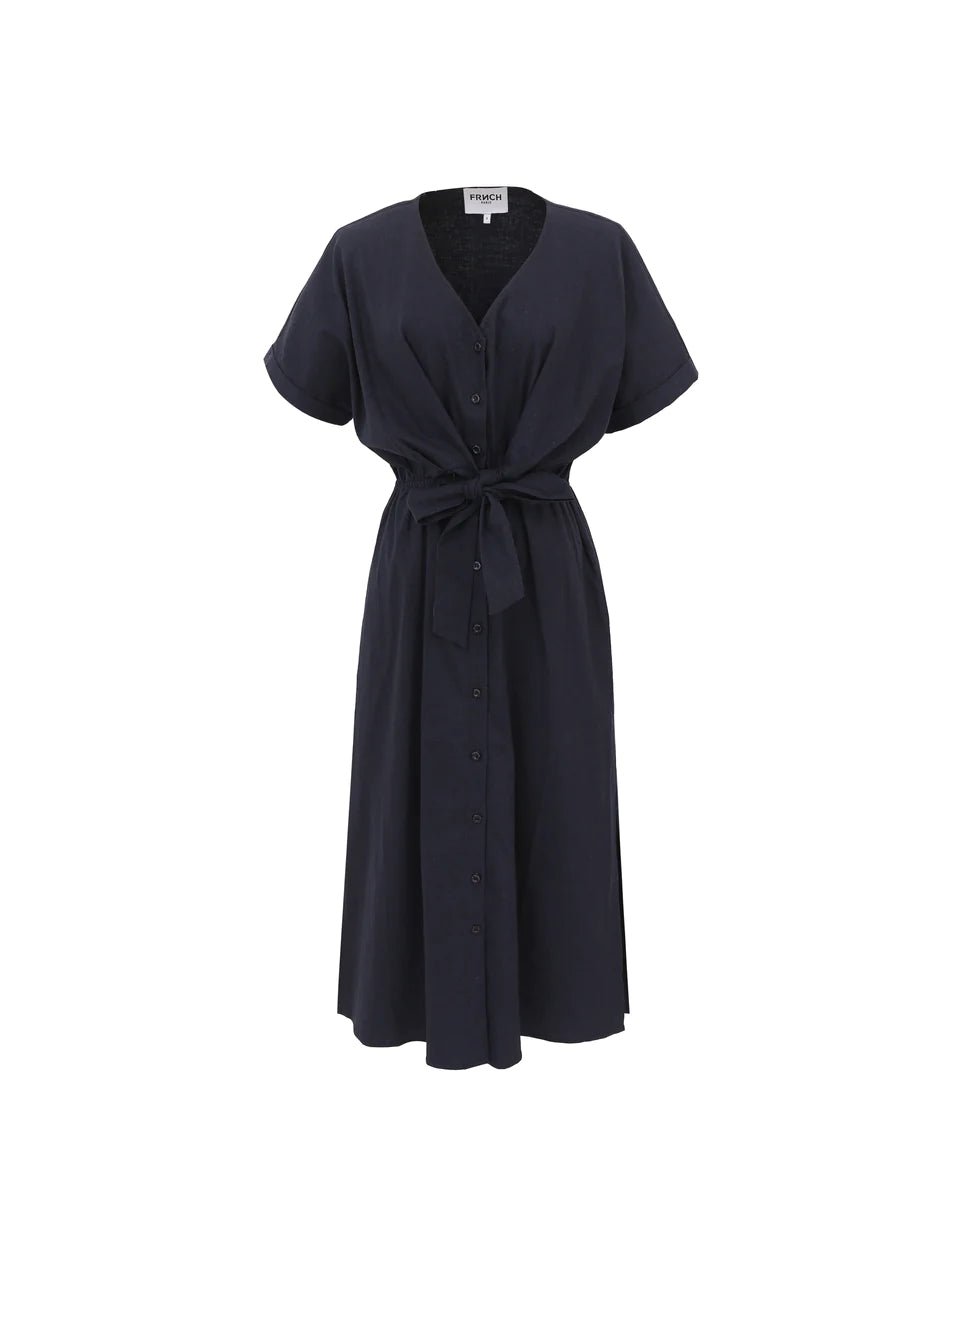 FRNCH - PERRINE NAVY TIE FRONT DRESS - Annabelle 87